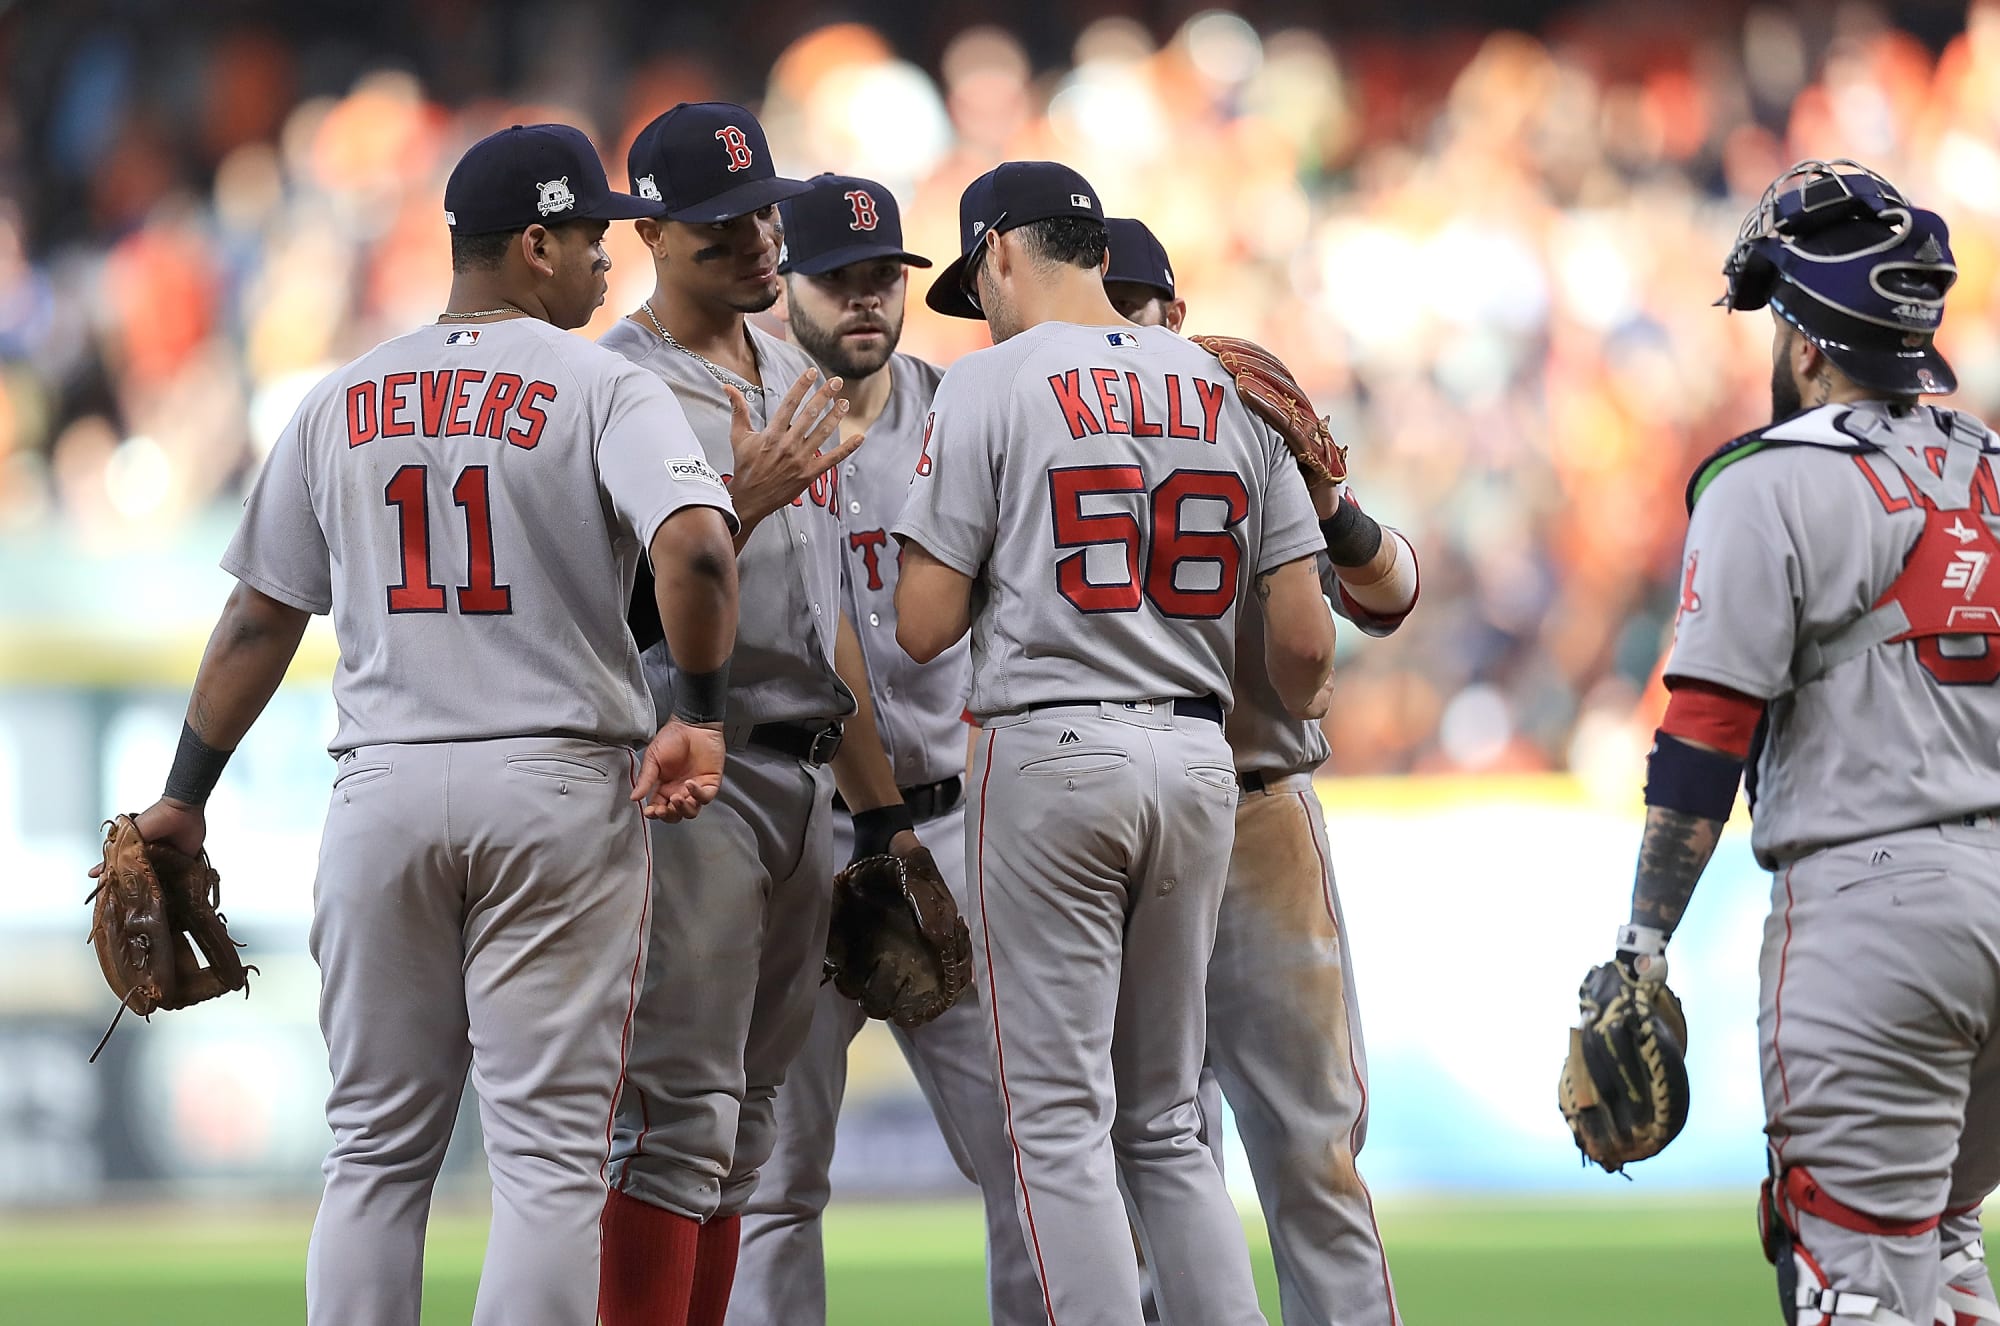 Boston Red Sox ALDS Game 2 preview and predictions